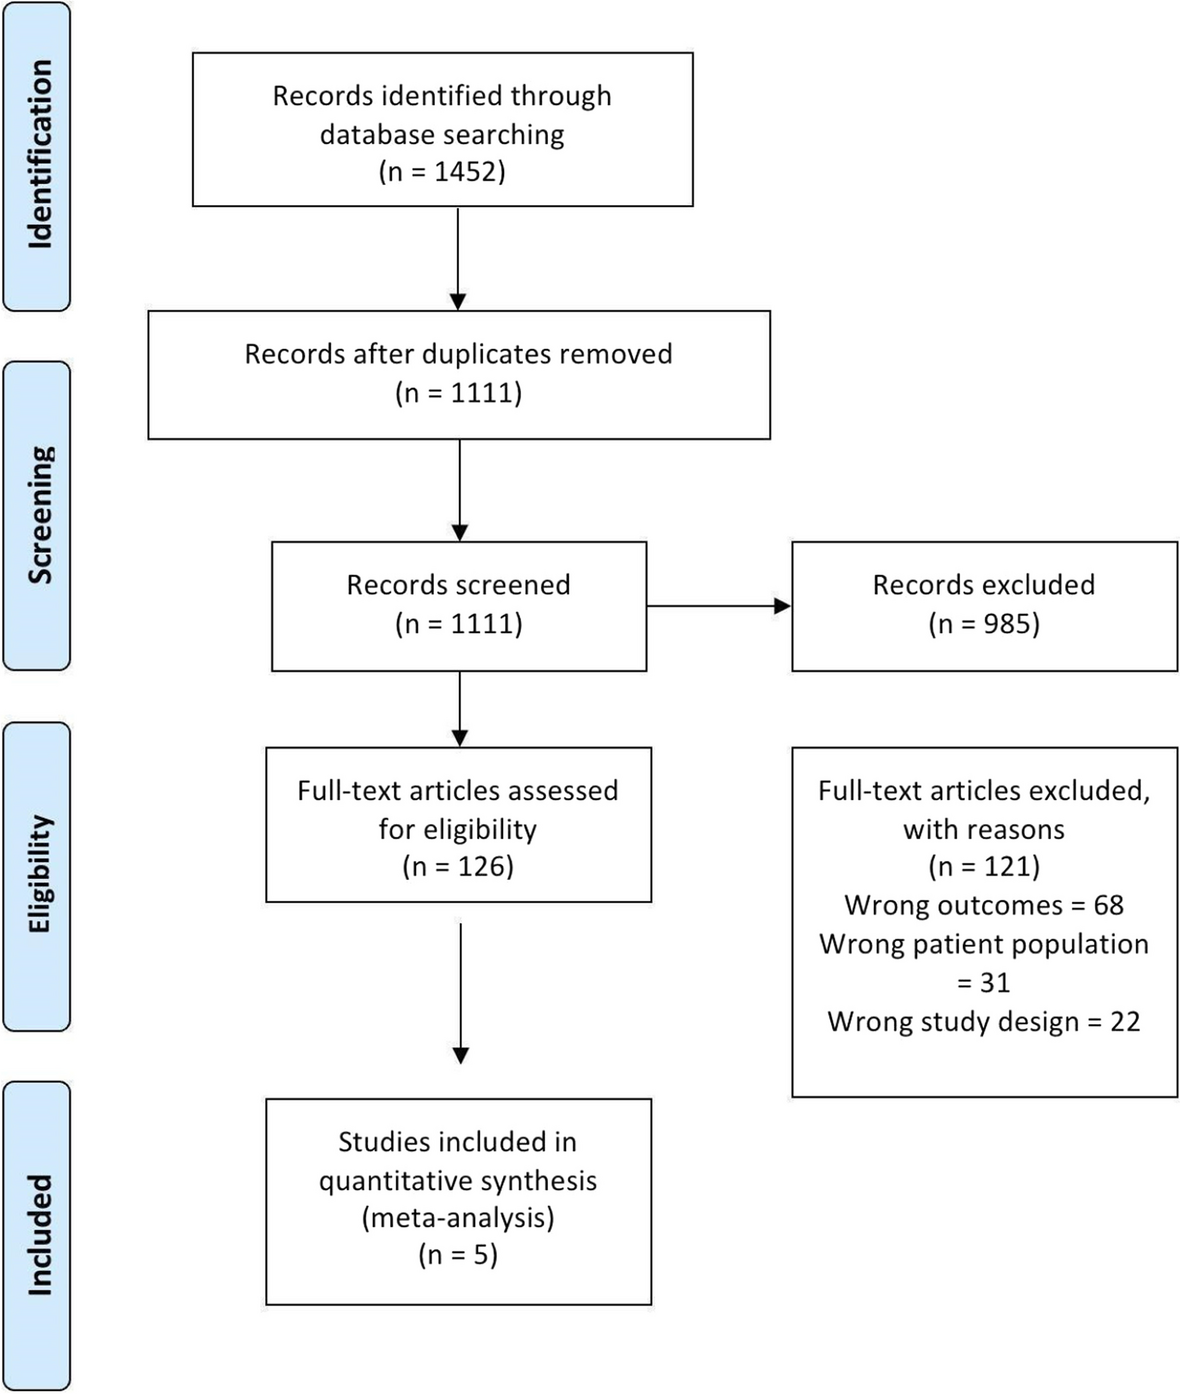 Early oral feeding and its impact on postoperative outcomes in head and neck cancer surgery: a meta-analysis